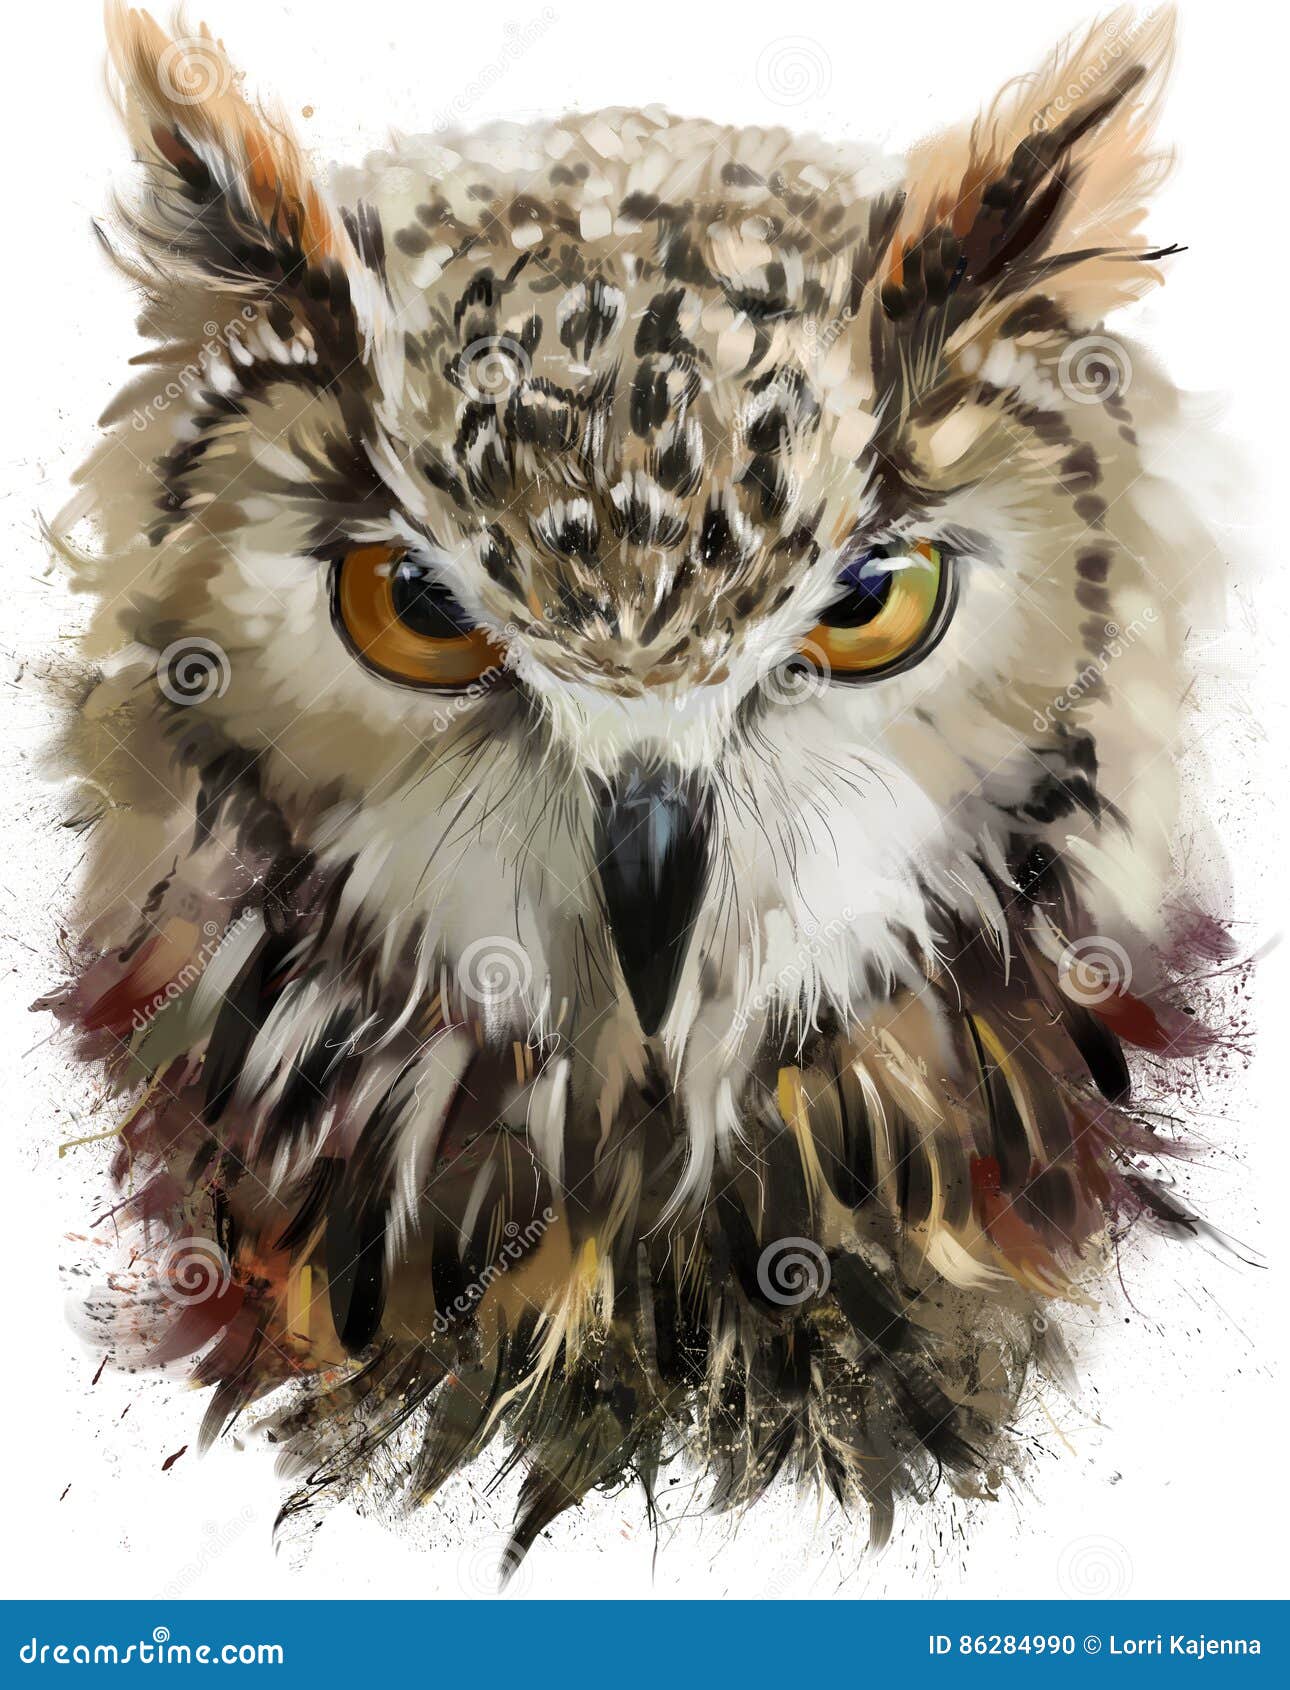 owl watercolor painting